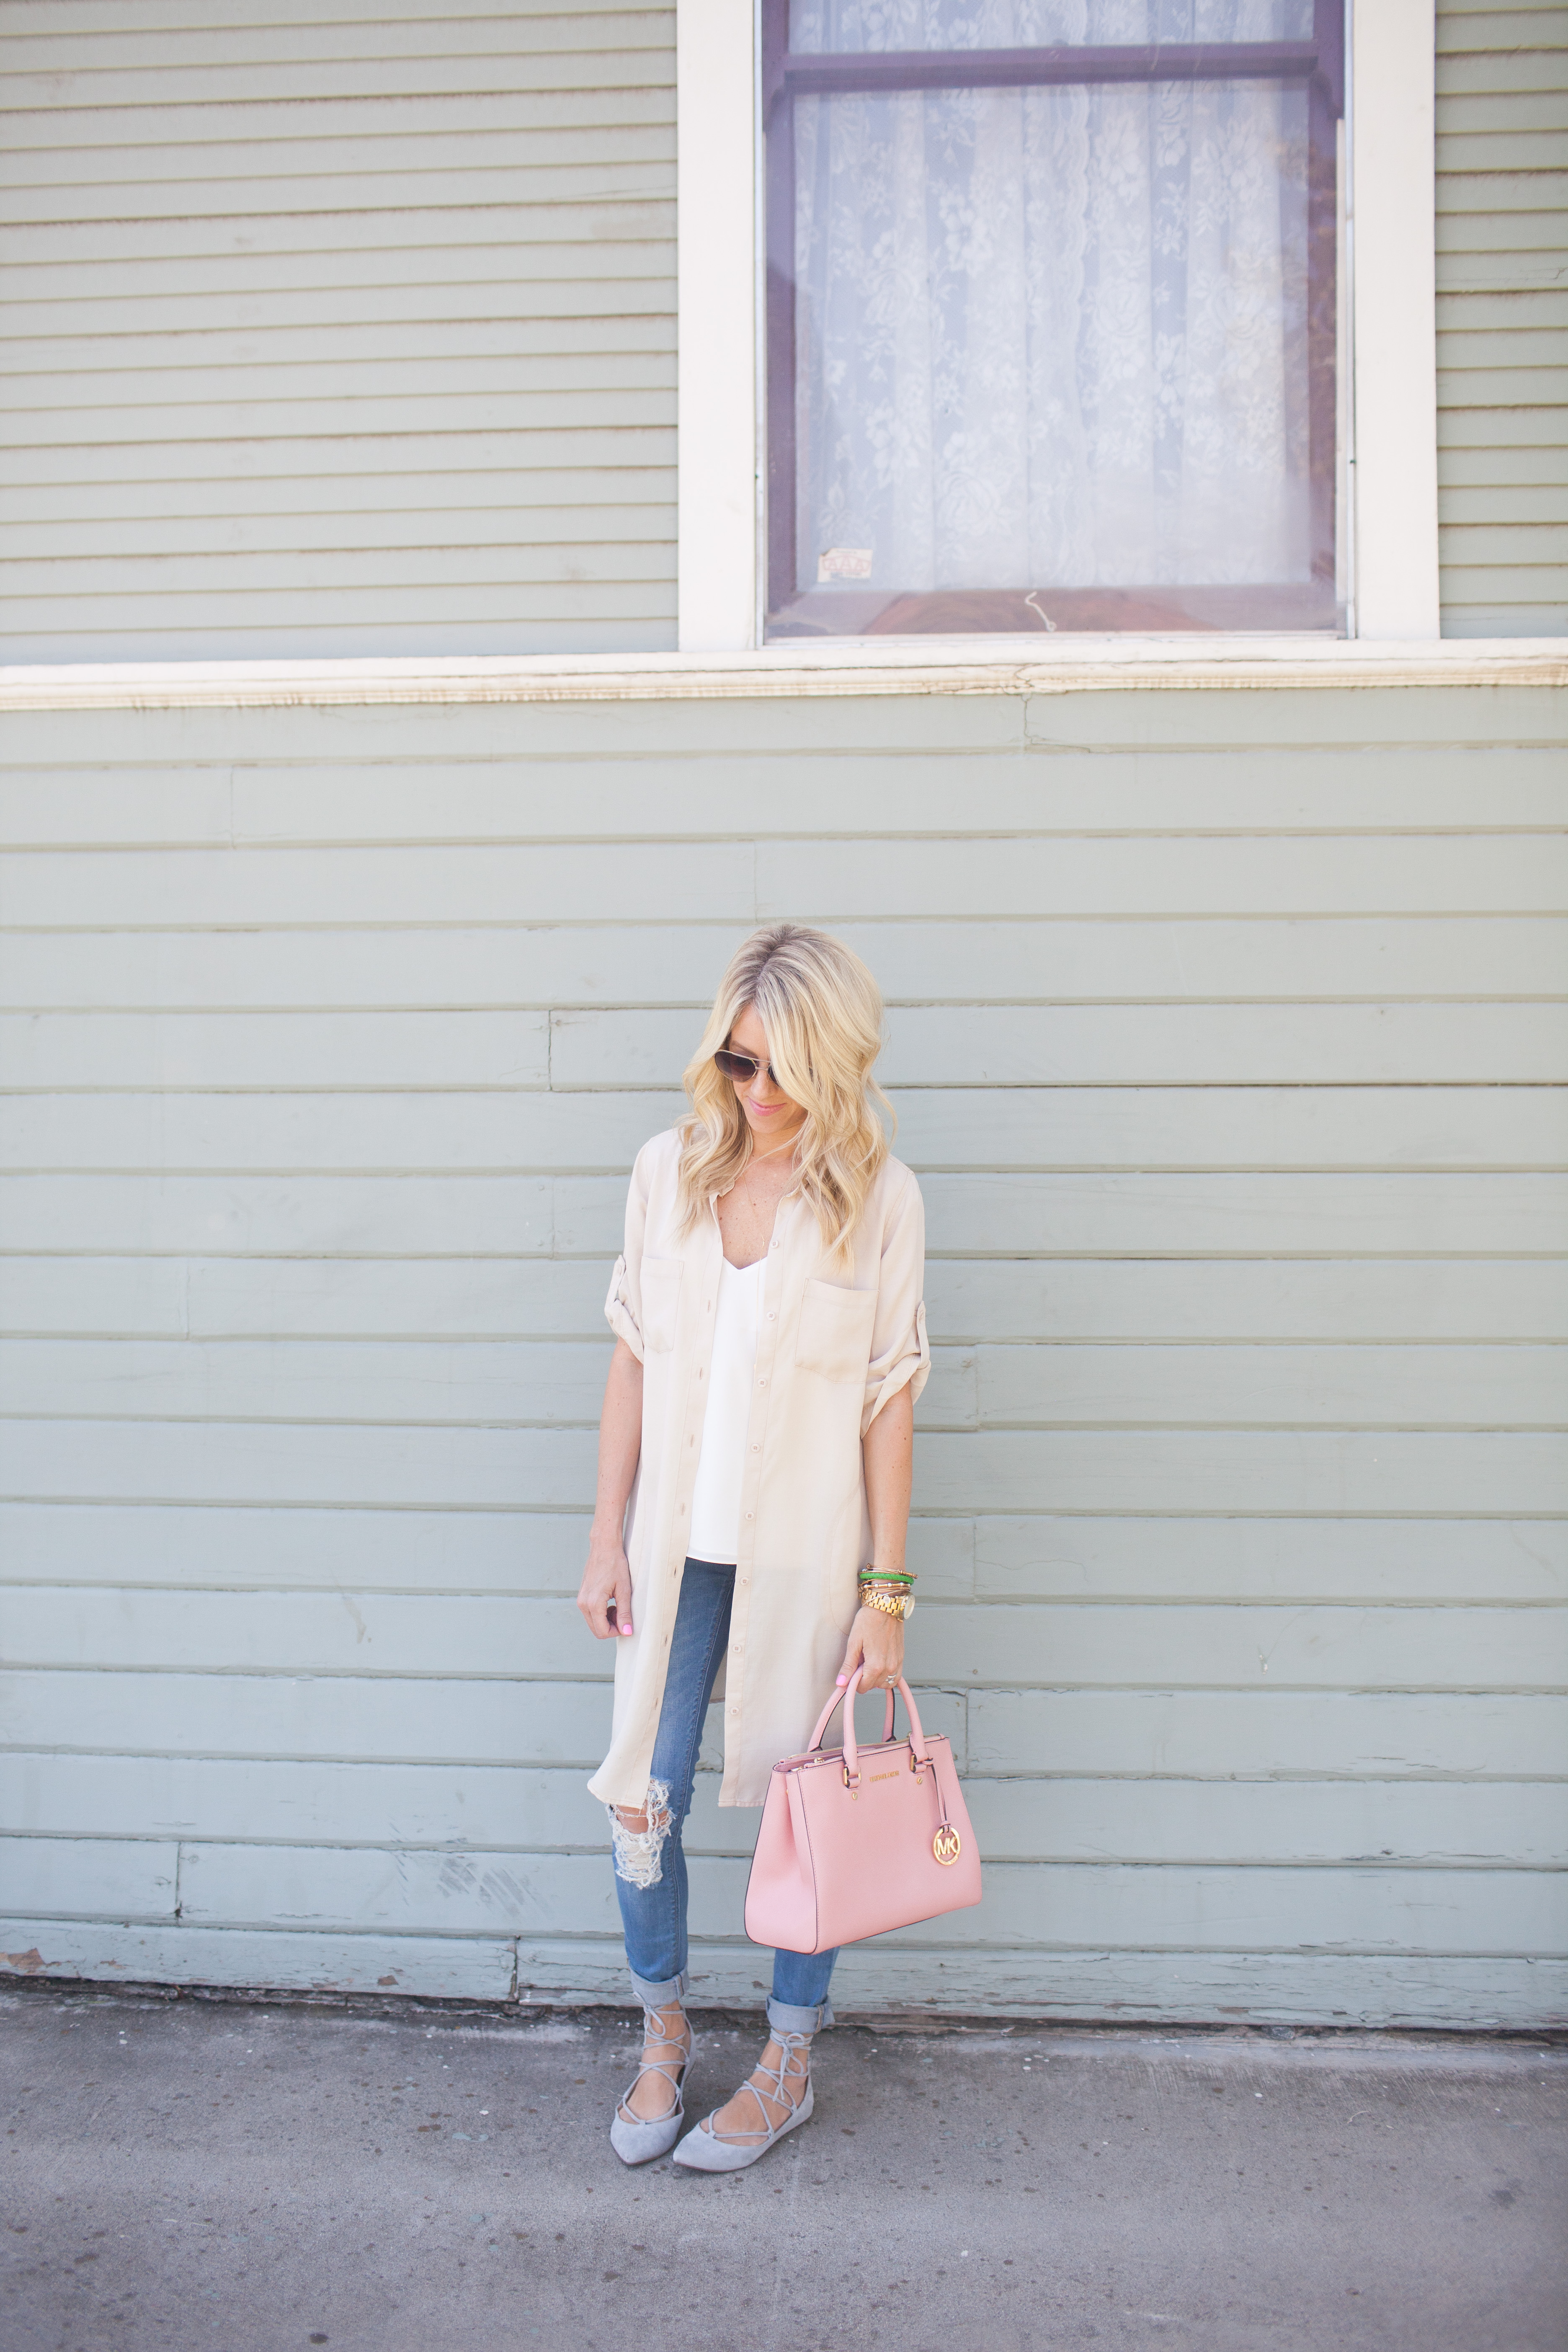 Kailee-Wright-shirtdress-jeans-nordstrom-8